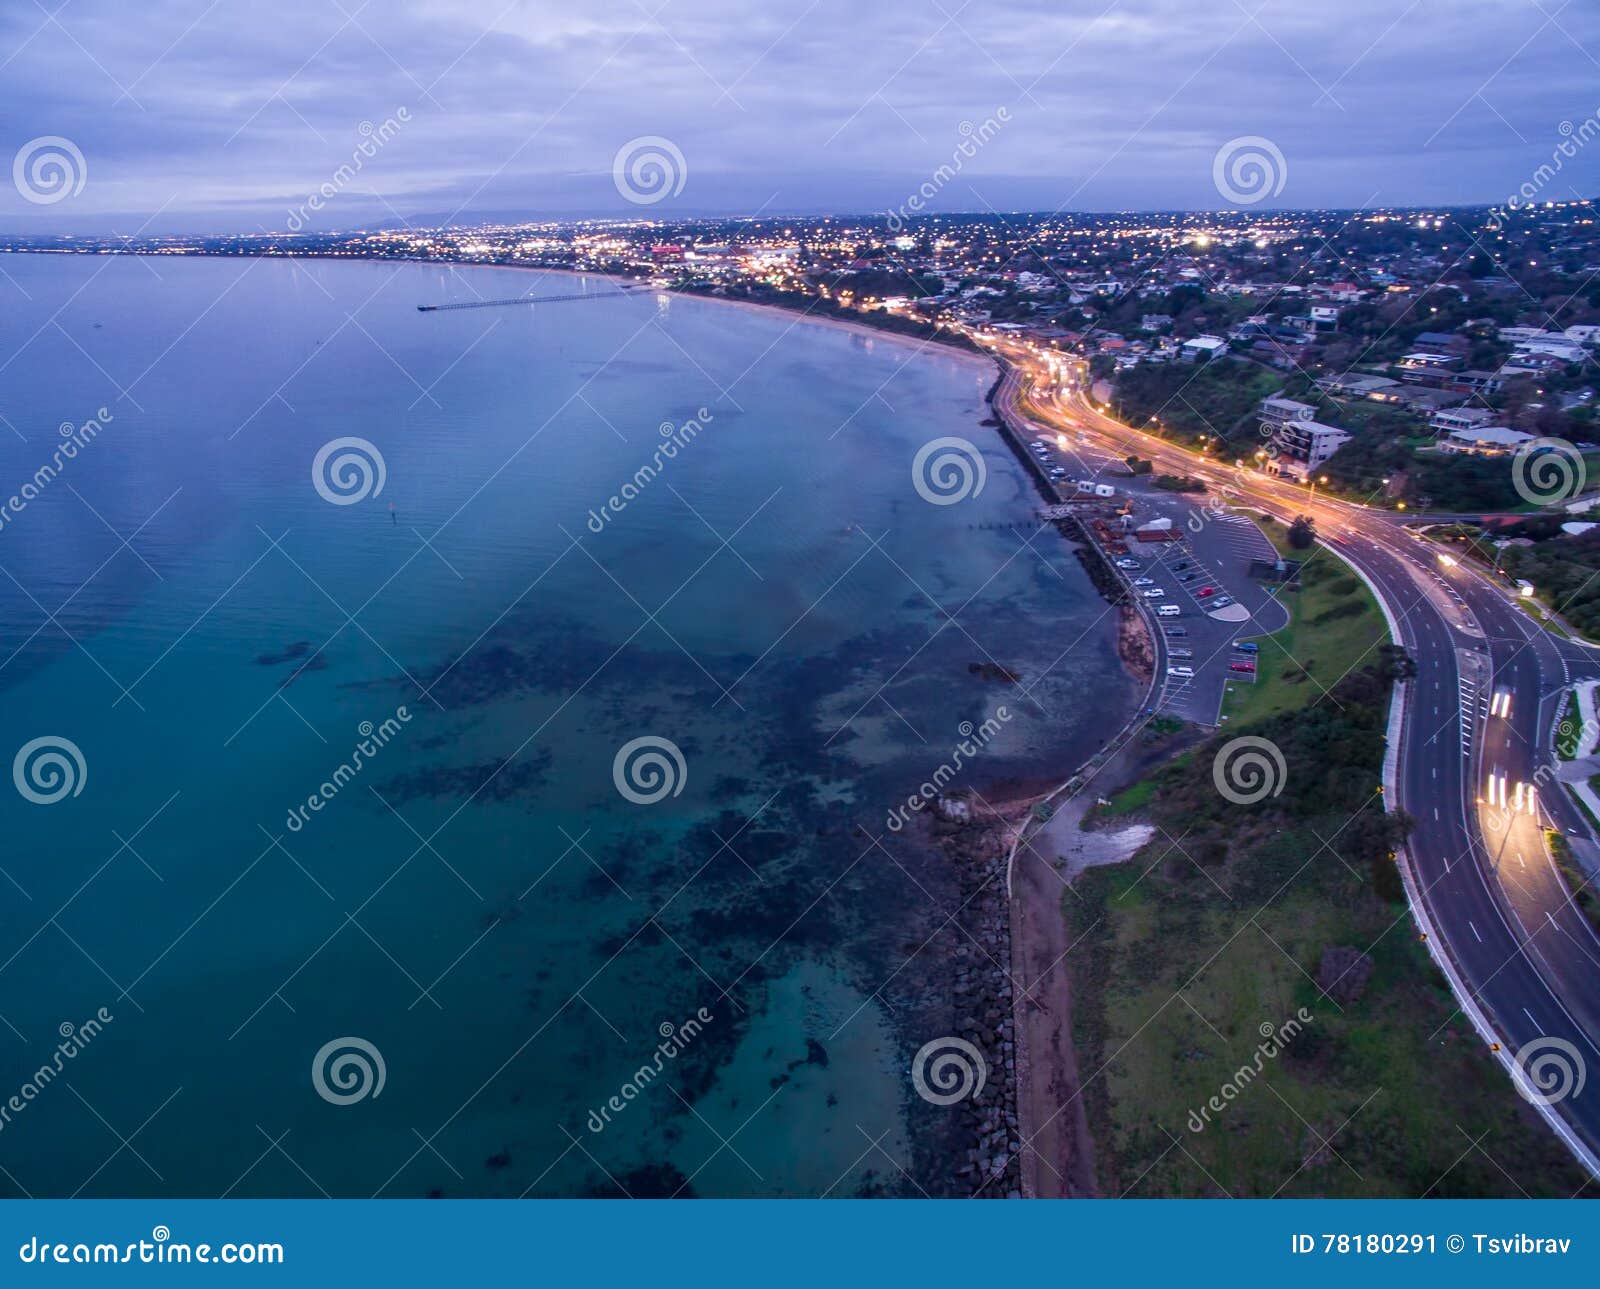 aerial view of frankston foreshore at dusk